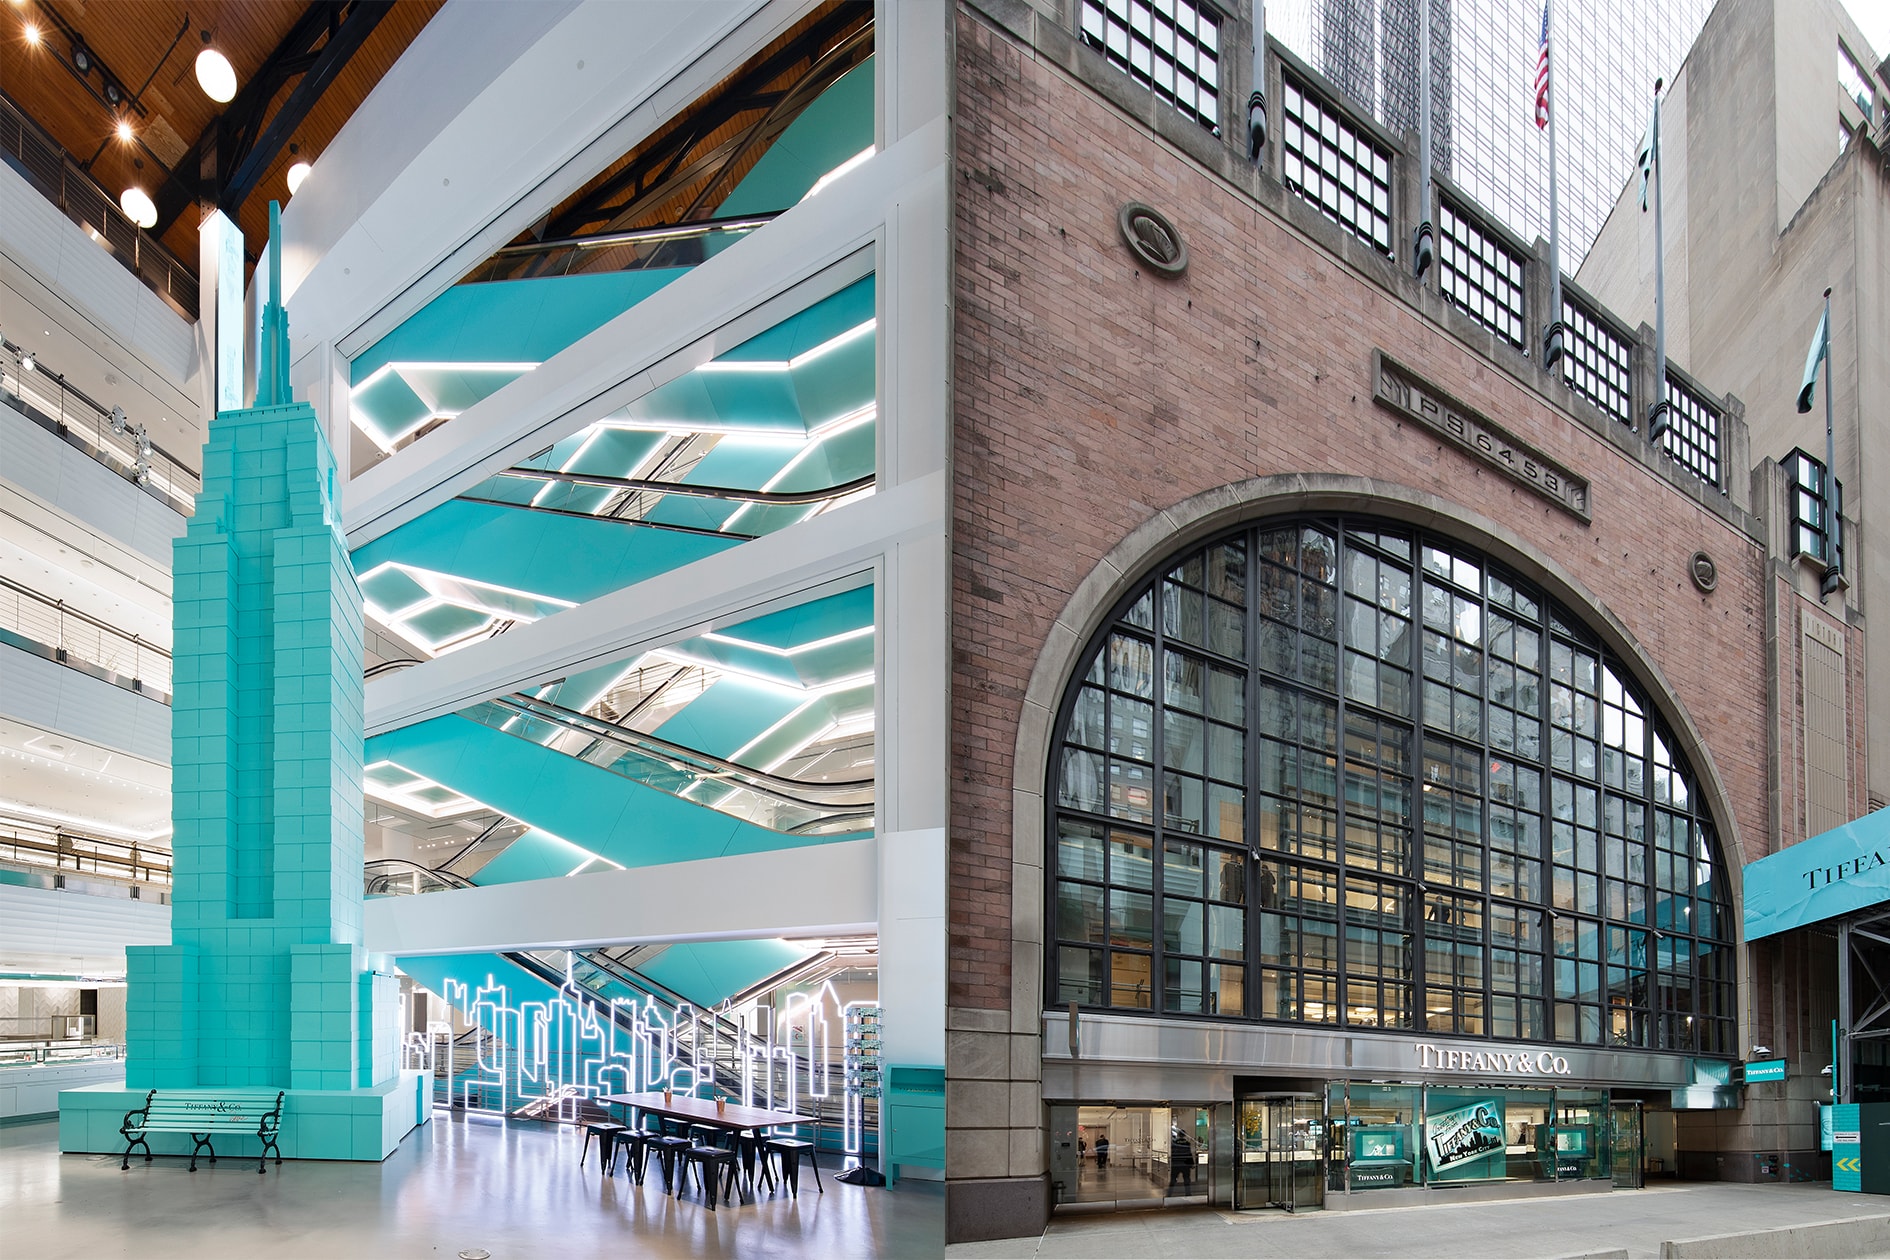 Tiffany & Co unveils new look for NYC flagship store - Jeweller